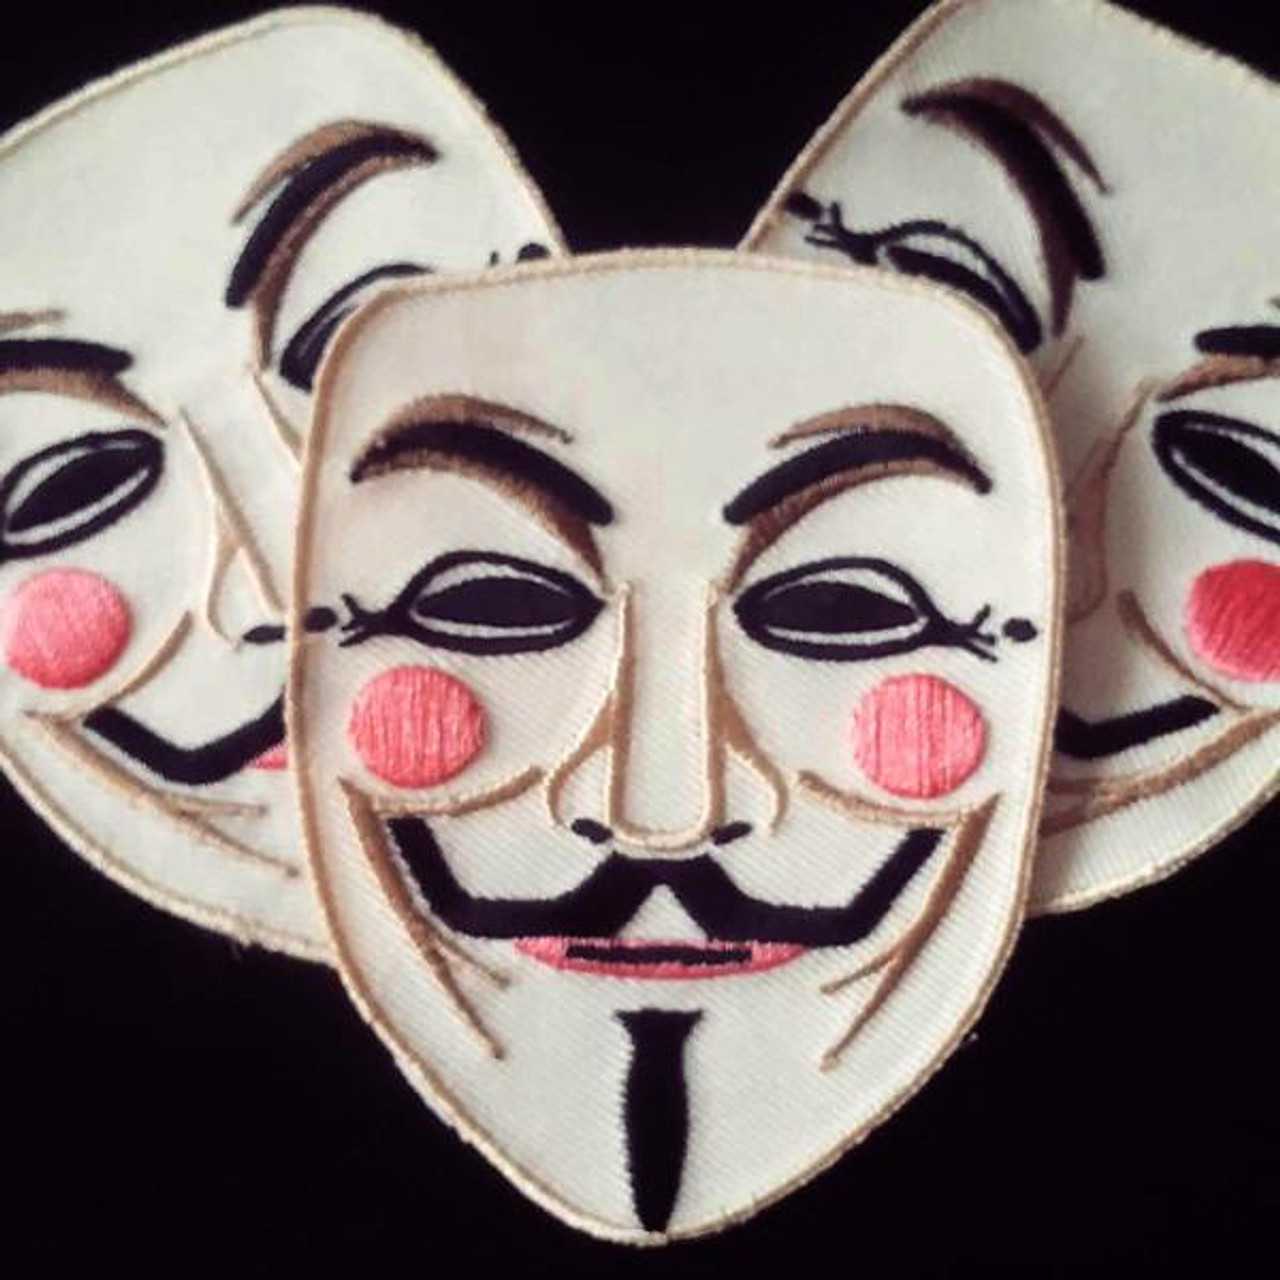 Guy Fawkes Mask and Historical Memory